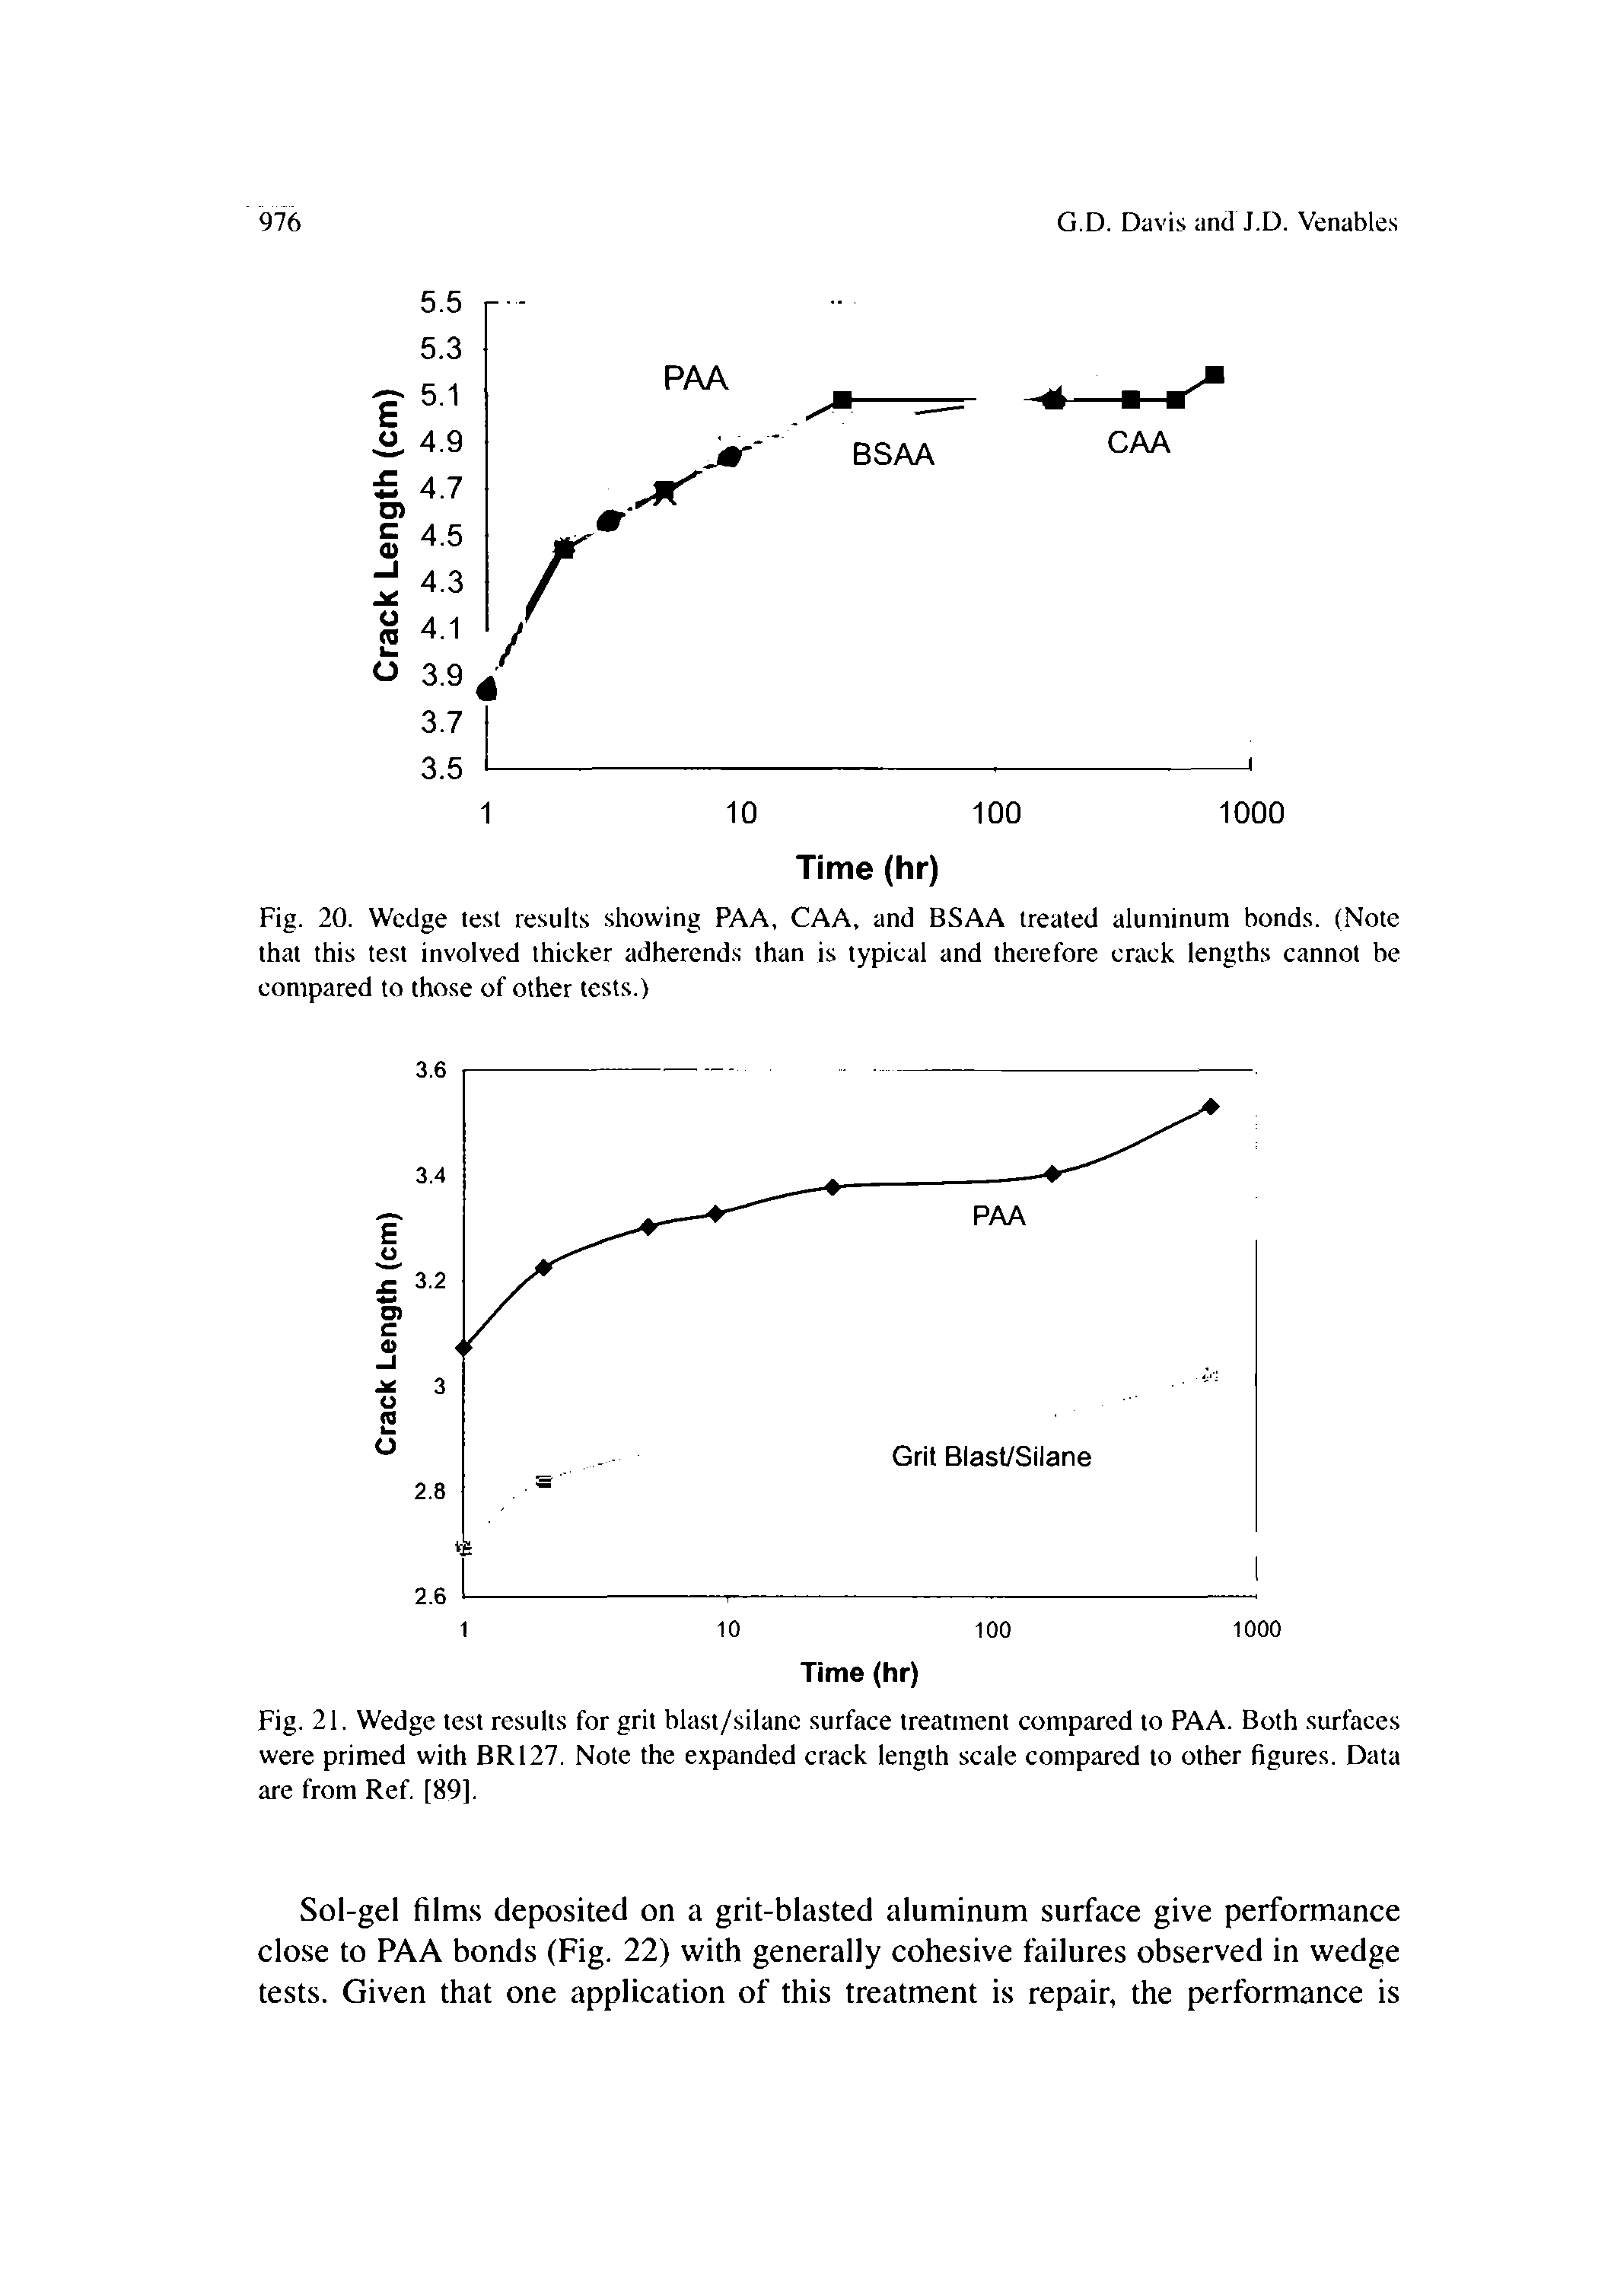 Fig. 21. Wedge test results for grit blast/silanc surface treatment compared to PAA. Both surfaces were primed with BR127. Note the expanded crack length scale compared to other figures. Data are from Ref [89].